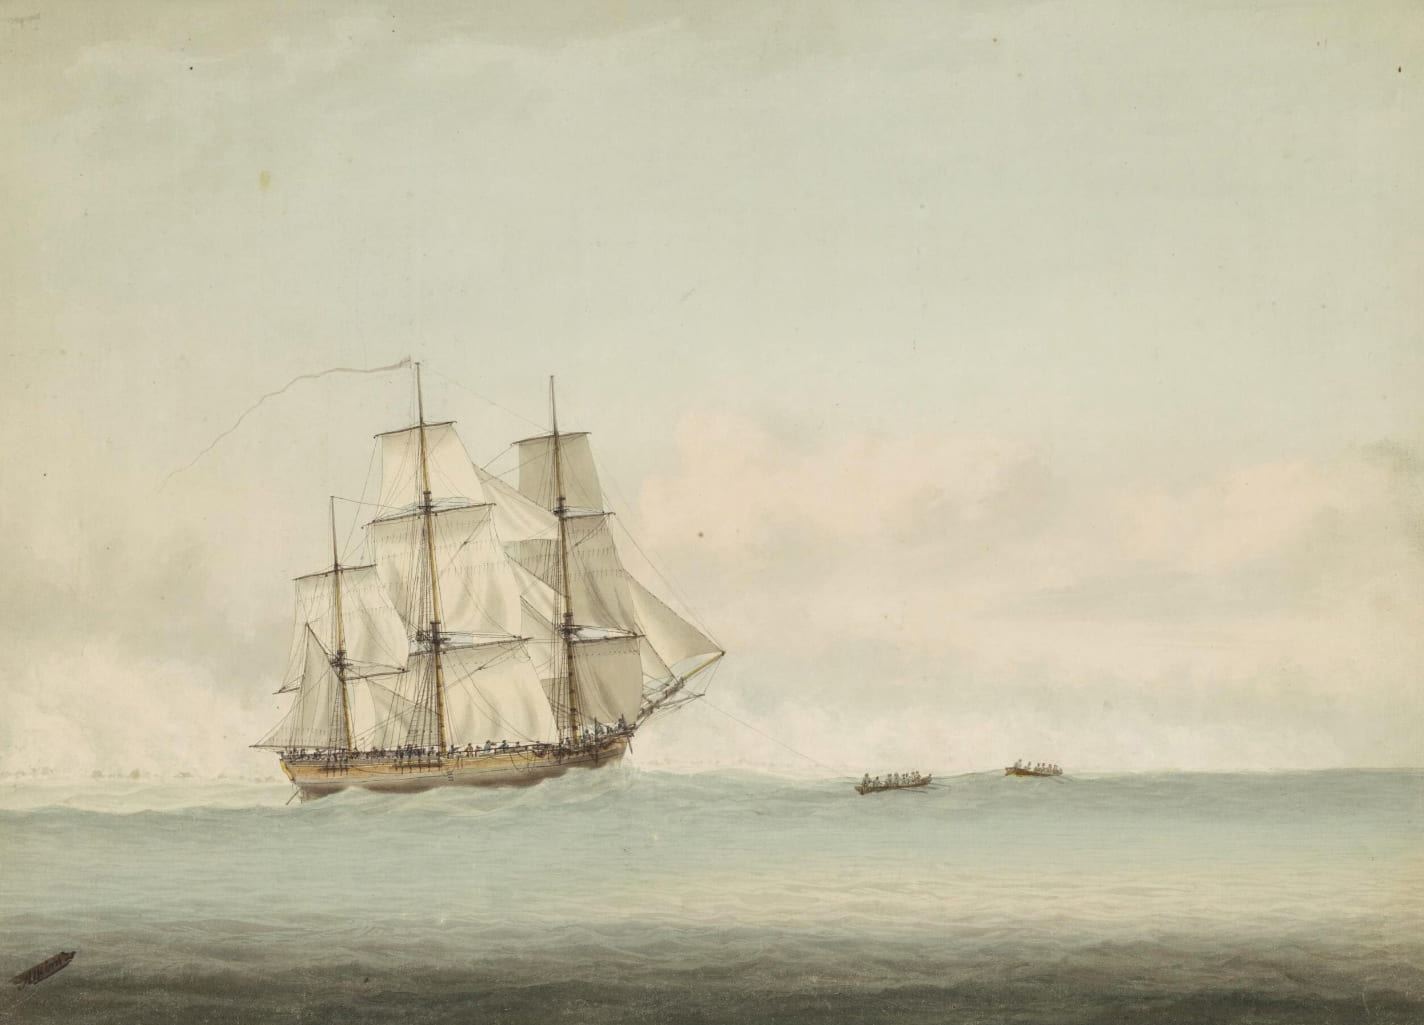 HMS_Endeavour_off_the_coast_of_New_Holland,_by_Samuel_Atkins_c.1794